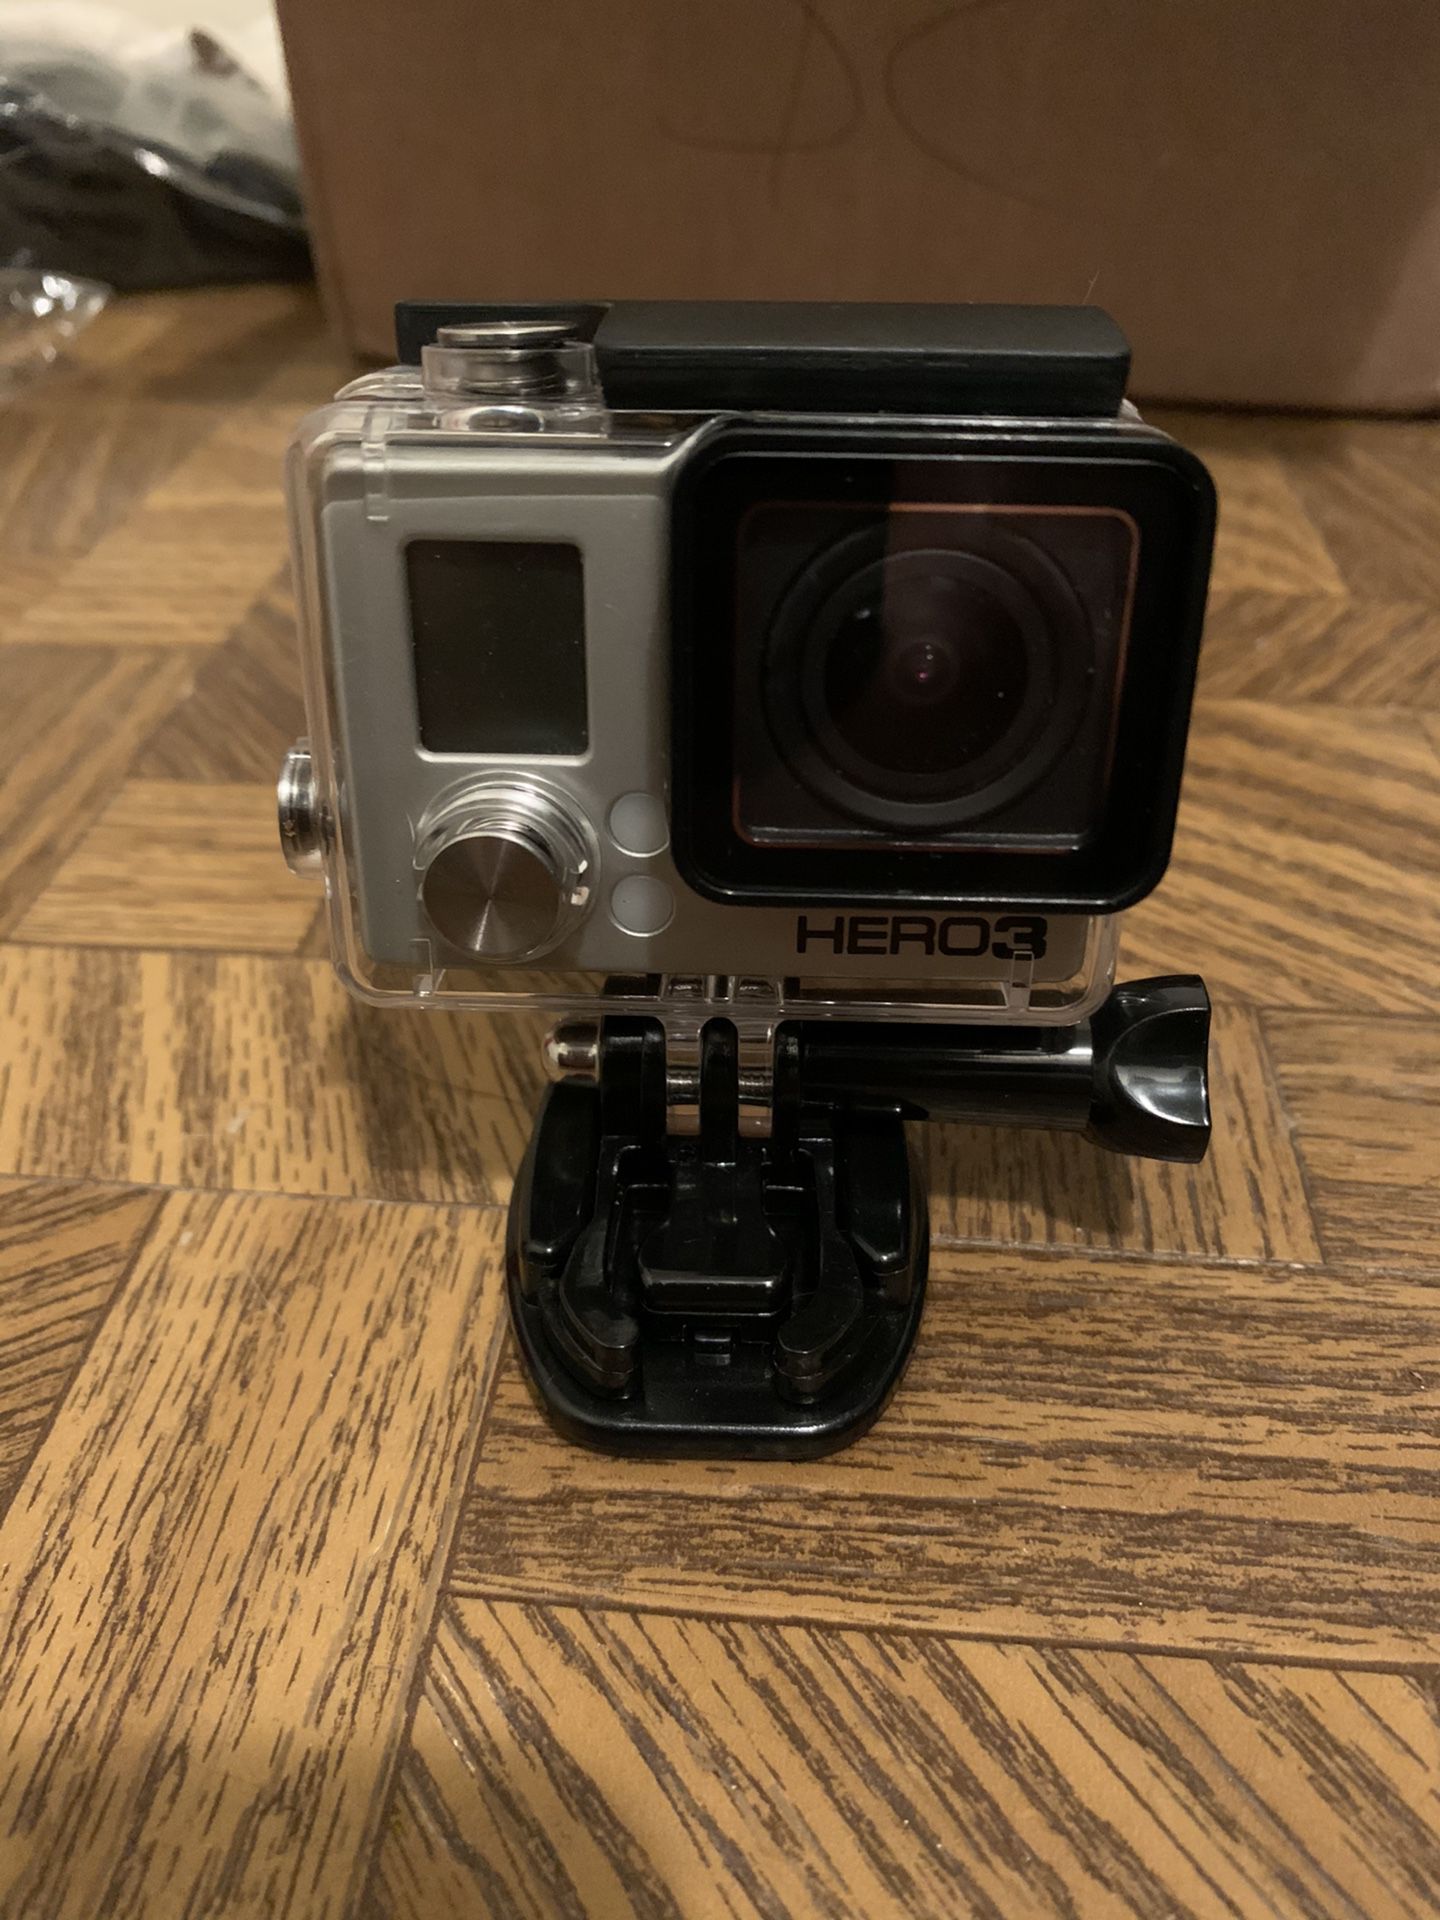 Gopro 3 - Brand new with water proof case